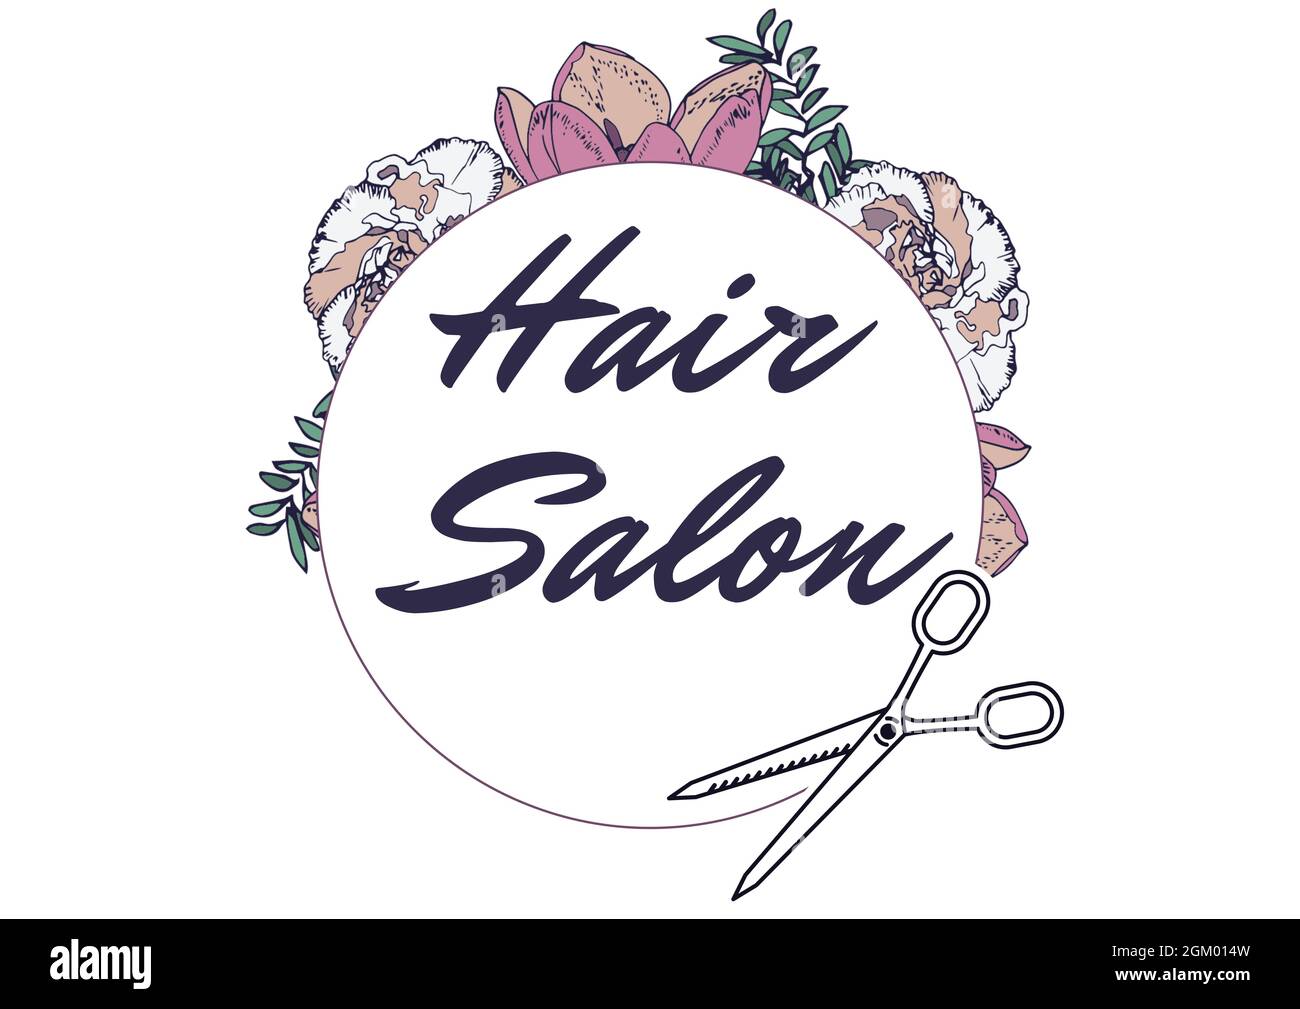 Floral designs over hair salon text on round banner with scissors icon against white background Stock Photo